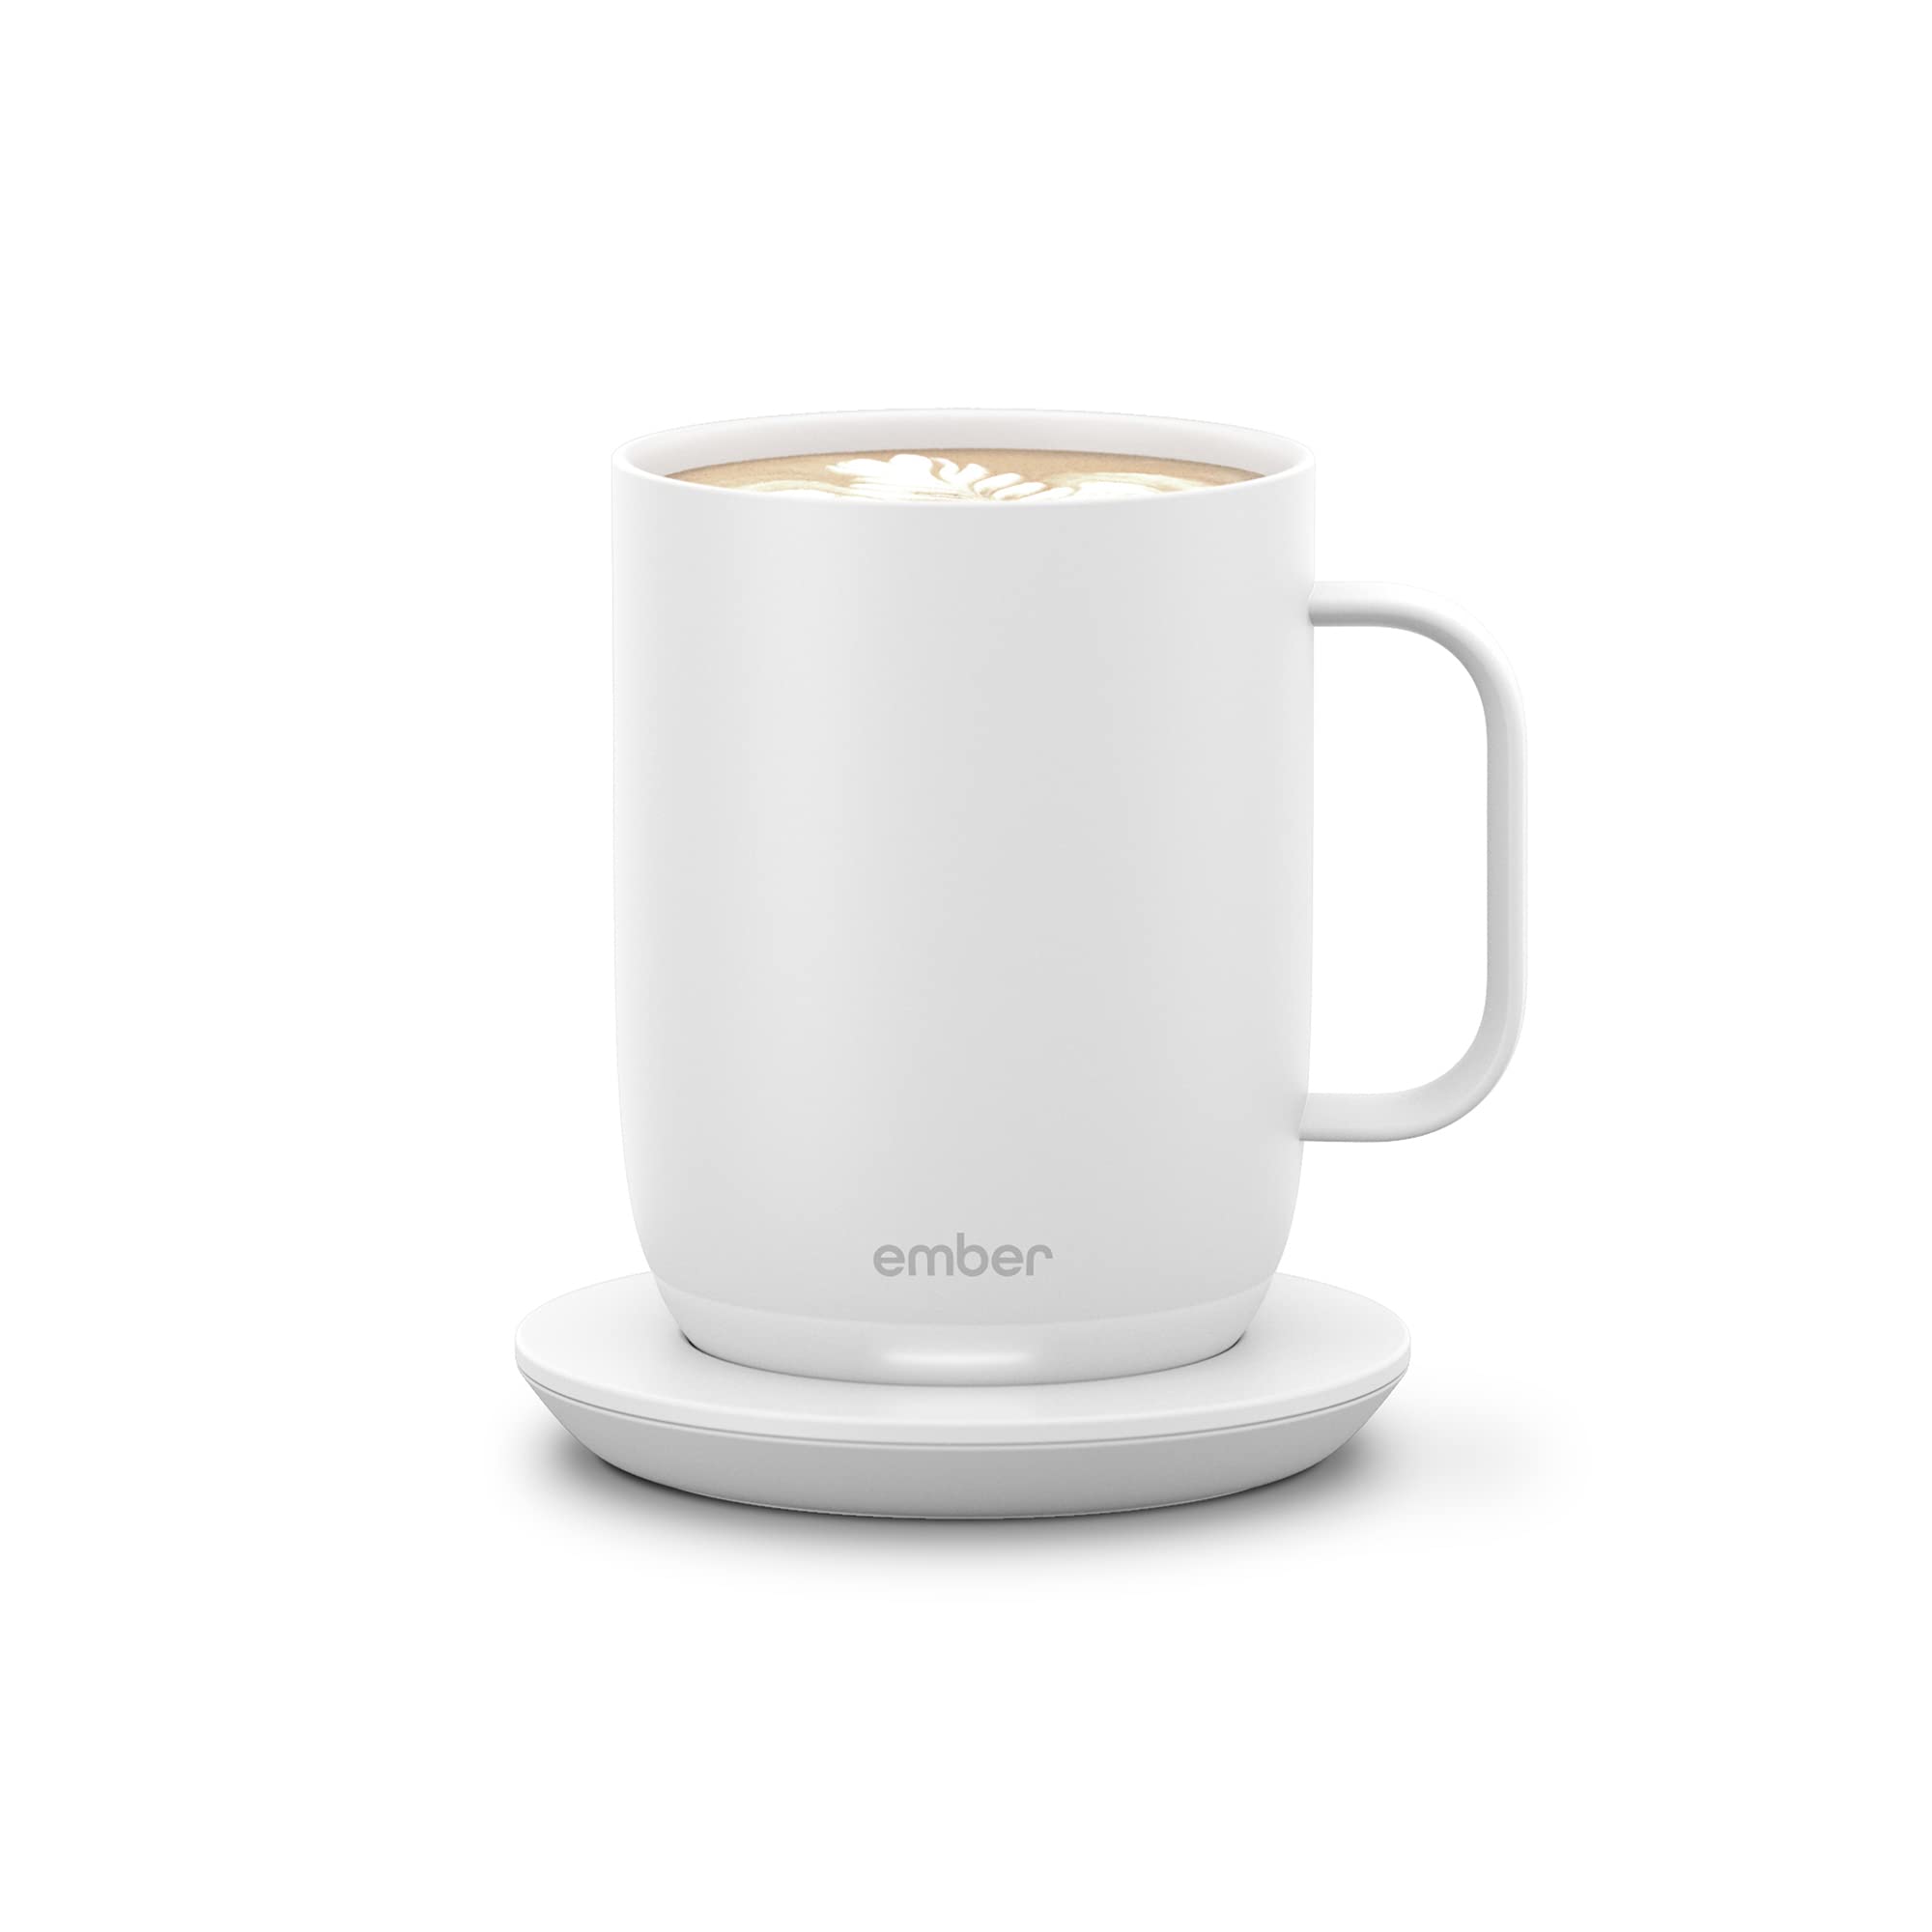 Ember Temperature Control Smart Mug 2, 14 Oz, App-Controlled Heated Coffee Mug with 80 Min Battery Life and Improved Design, White